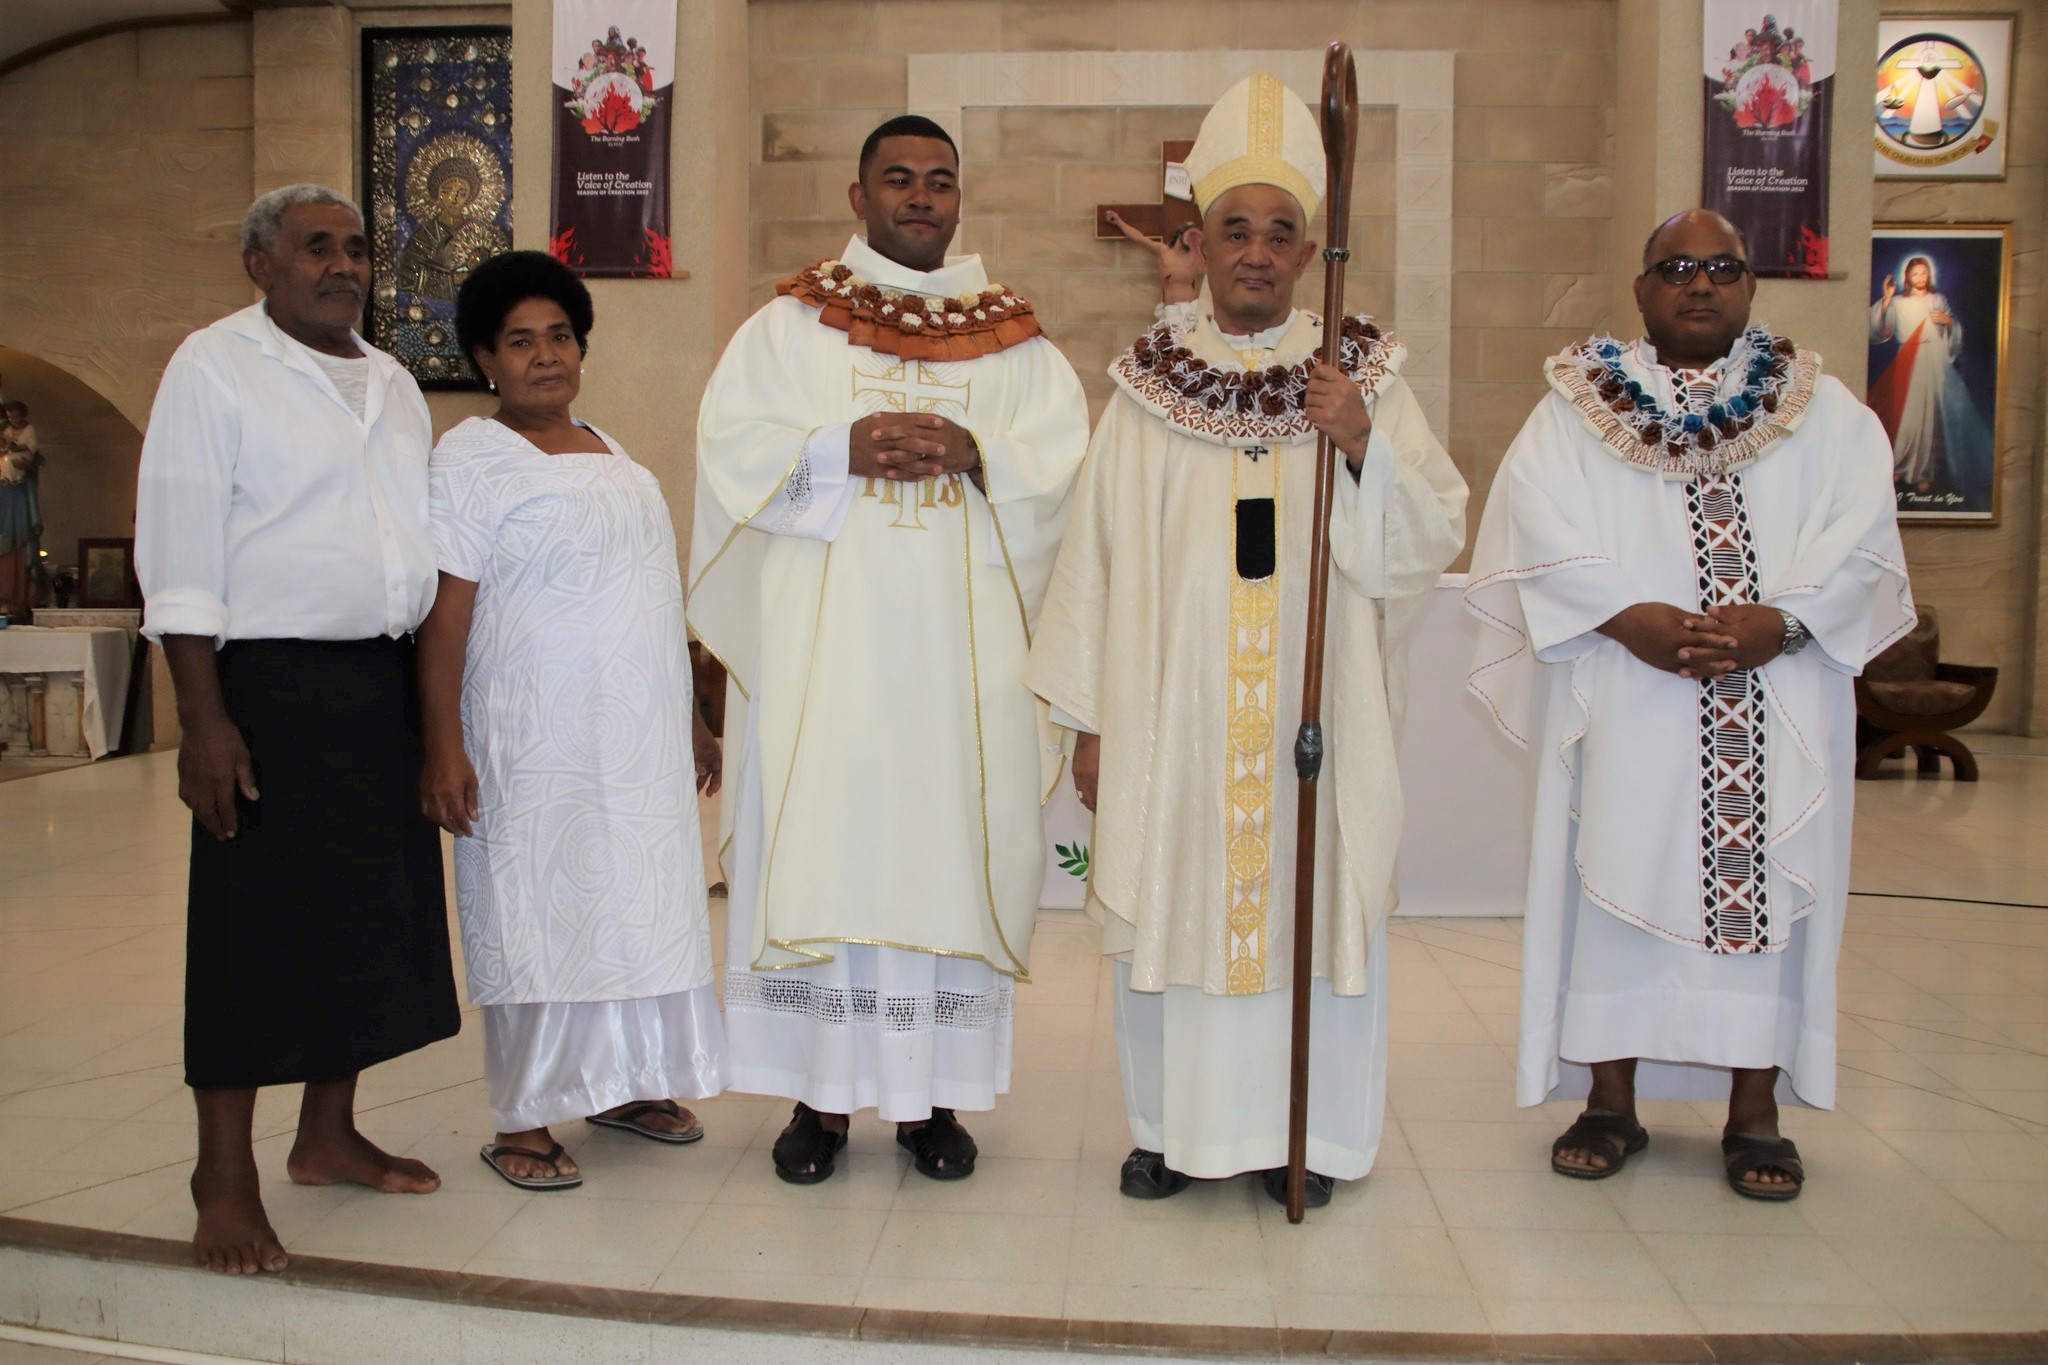 Fr Iosefo Amuri with his parents Archbishop and Provincial